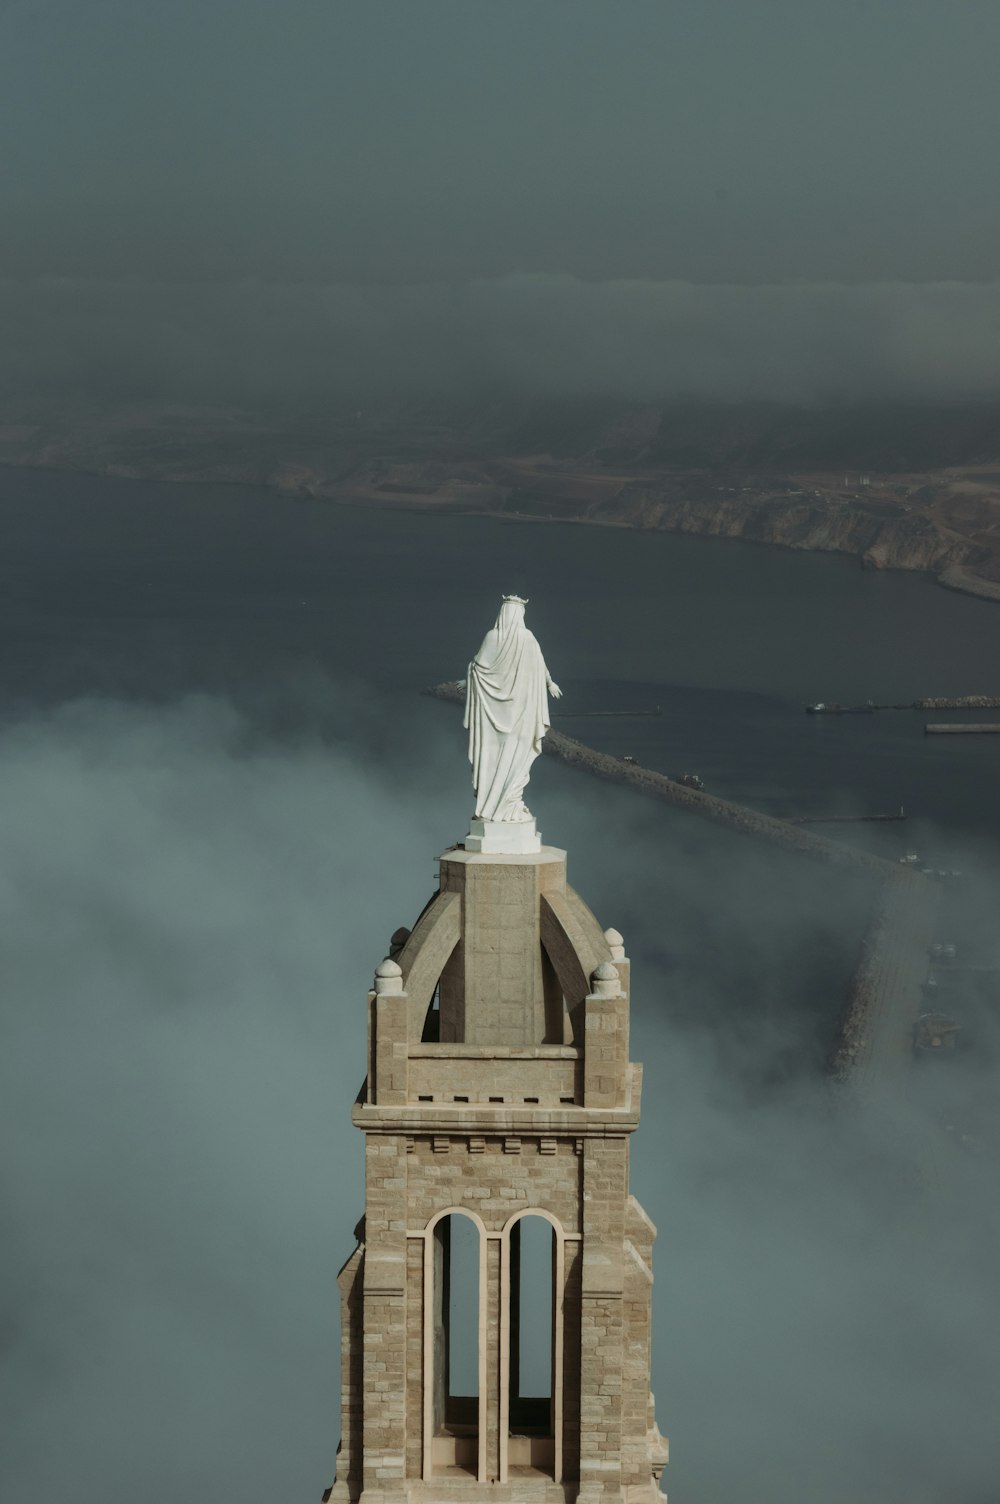 a statue on a tower